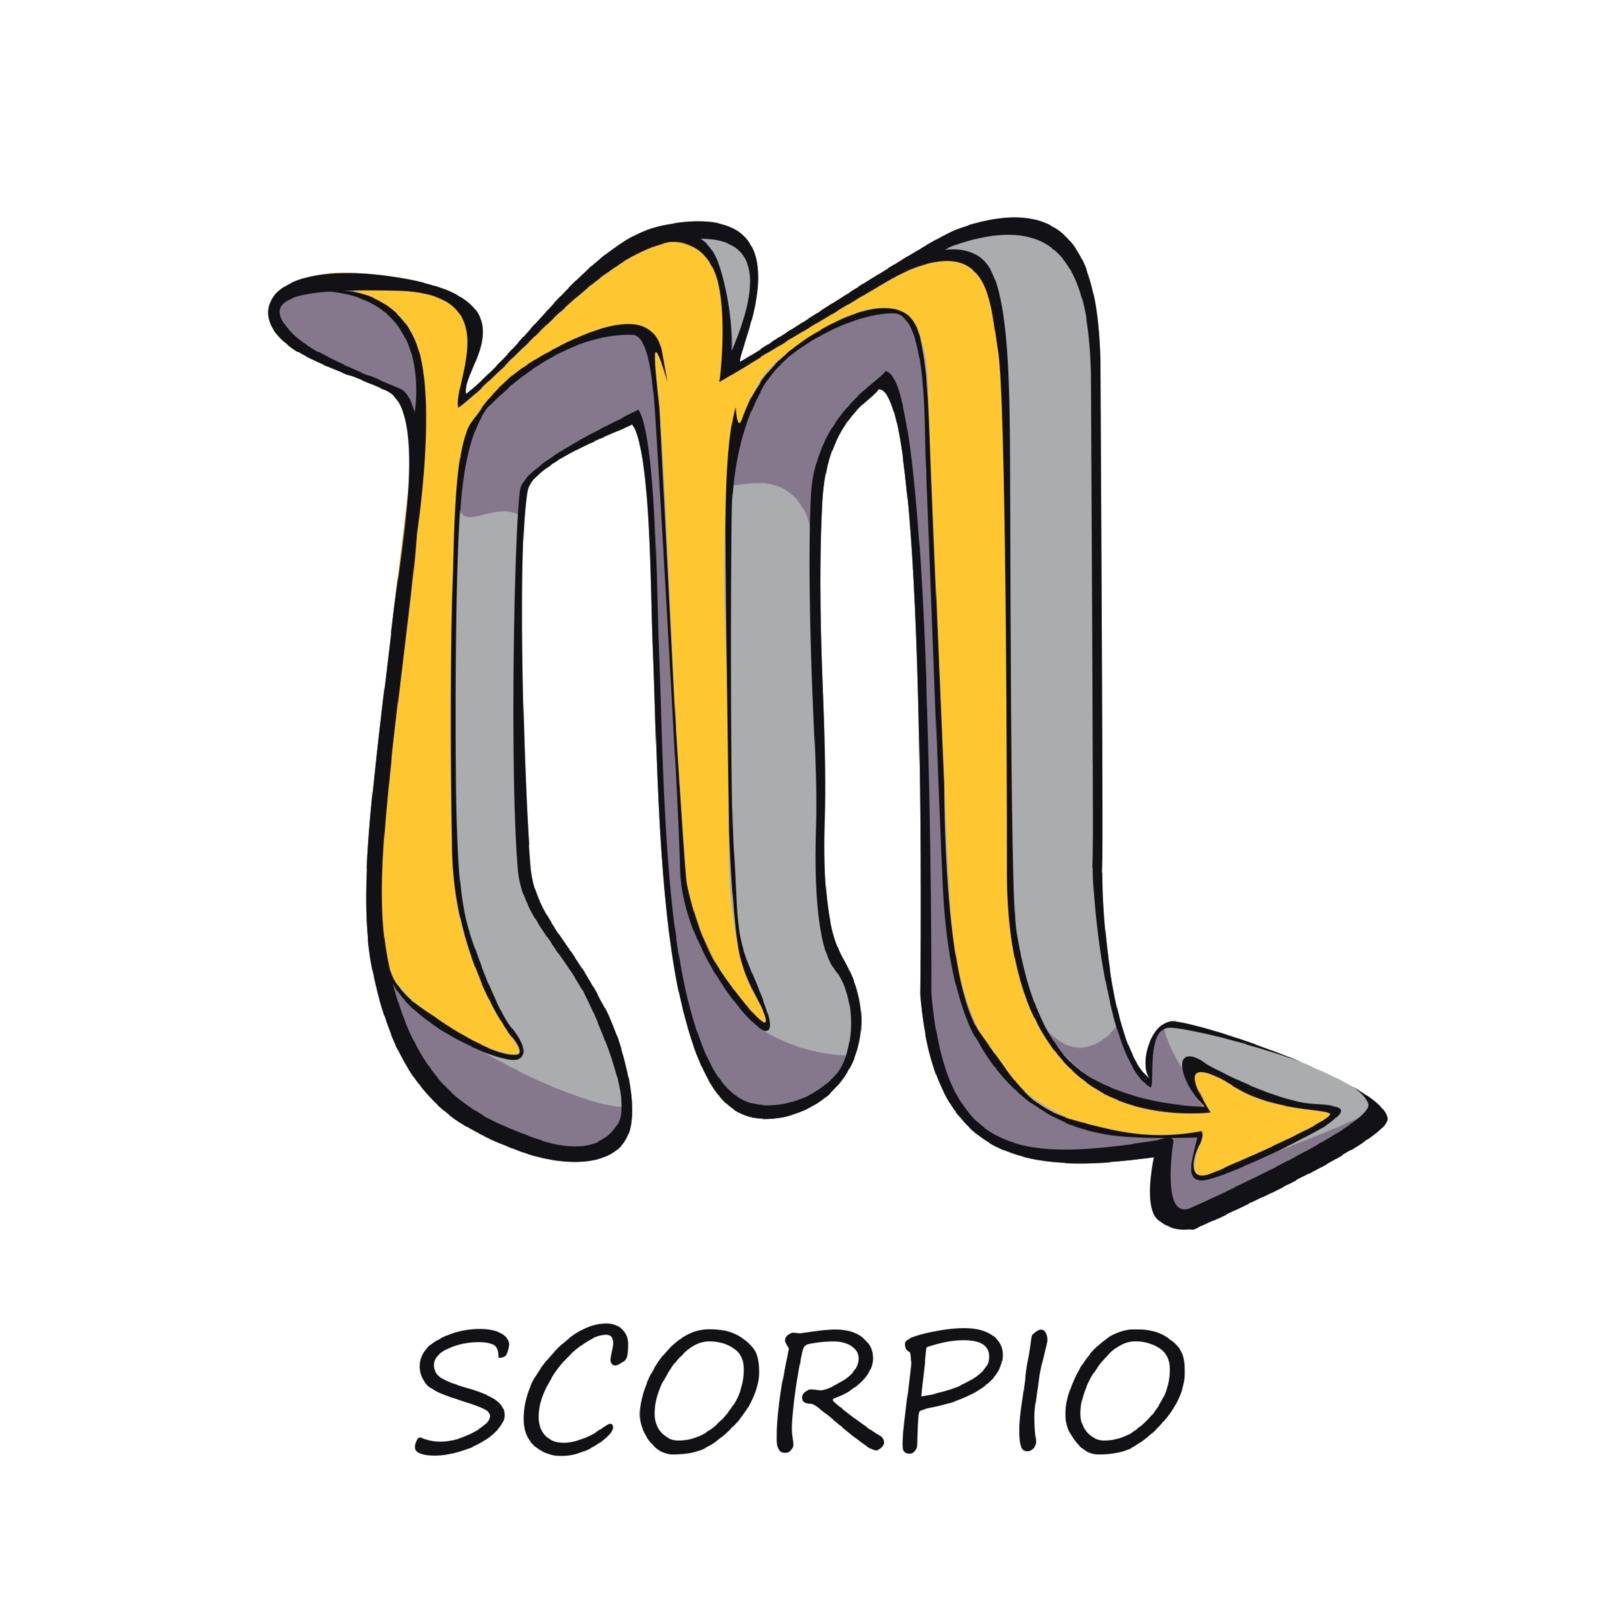 Scorpio zodiac sign flat cartoon vector illustration. Celestial scorpion, water horoscope symbol. Astrological monthly prediction object. Astrology chart yellow element. Isolated hand drawn item